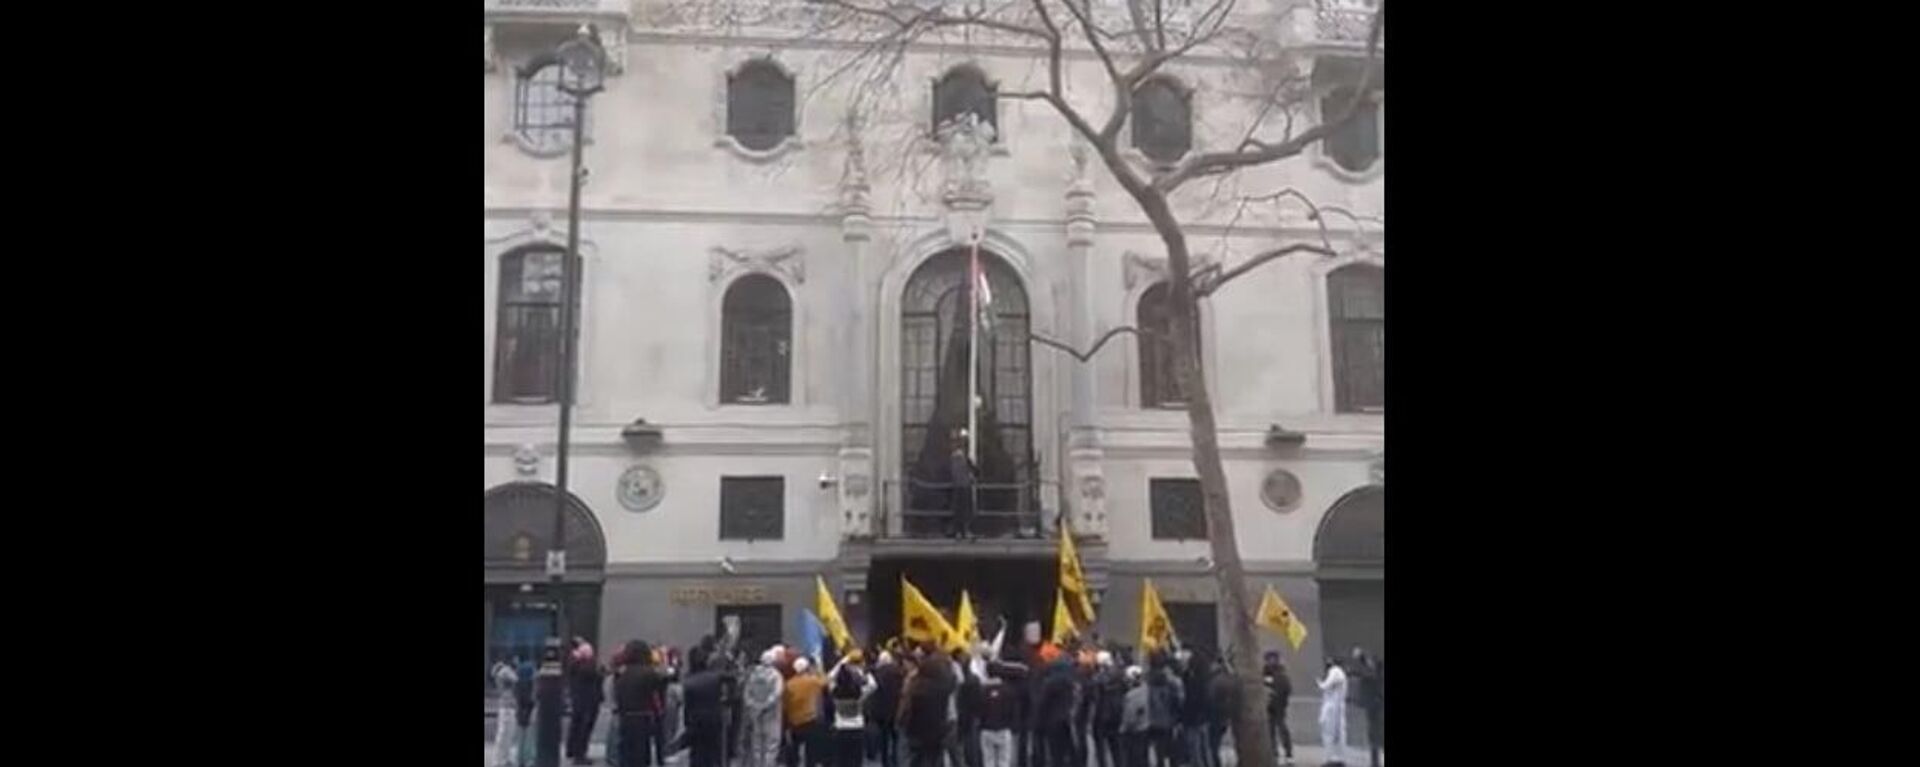 Khalistani separatists attempt to pull down the Indian flag at the High Commission of India, London pm March 19, 2023 - Sputnik India, 1920, 20.03.2023